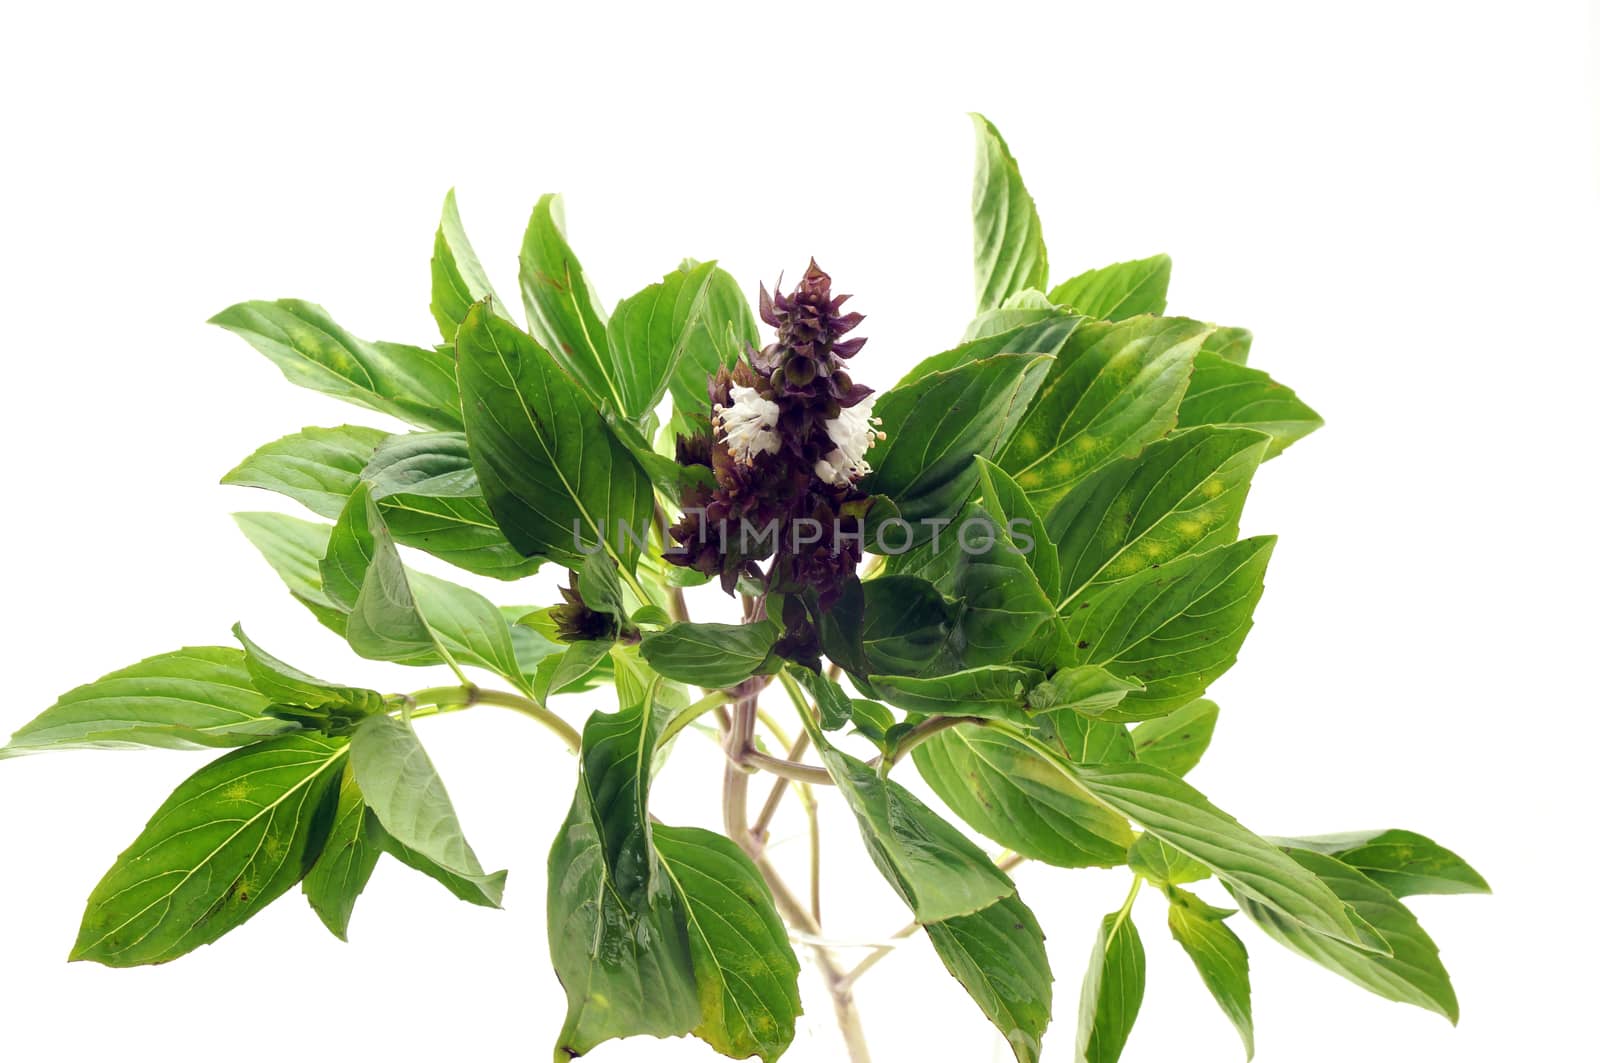 Basil leaves has green color and 
flowers has purple when flower full bloom are white.                              